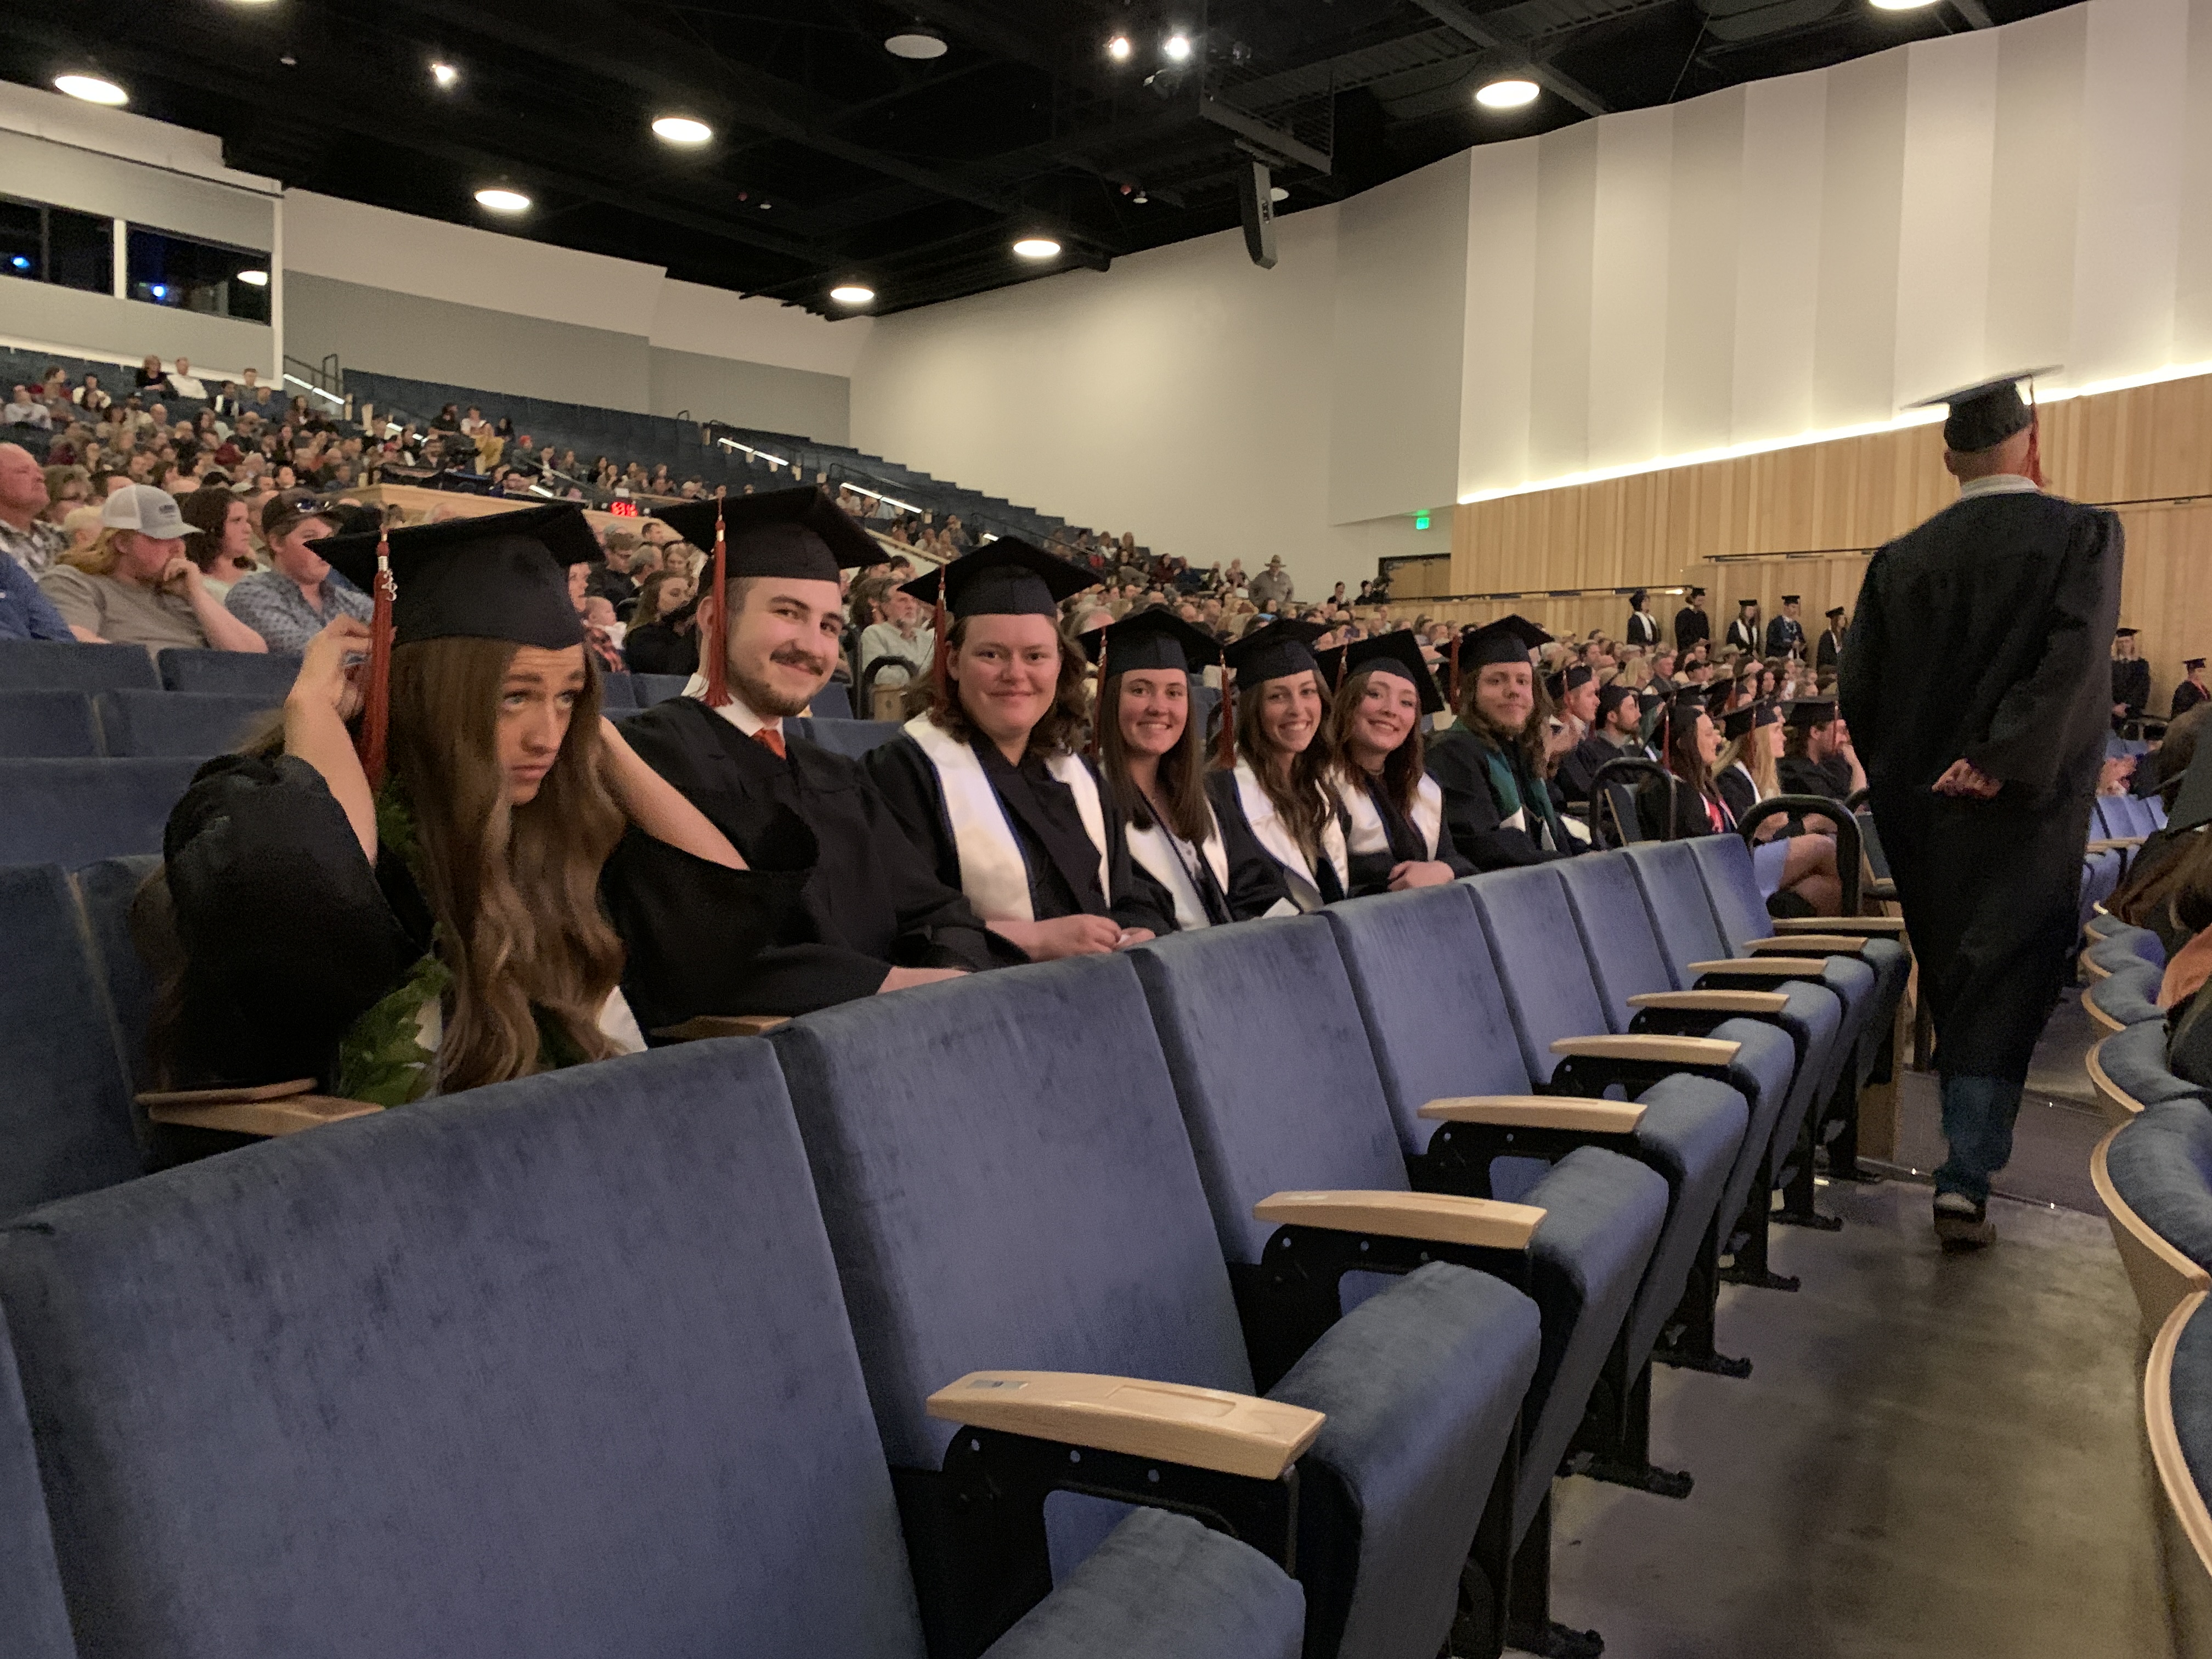 A row of students wearing graduation regalia sit in a row in an auditorium.